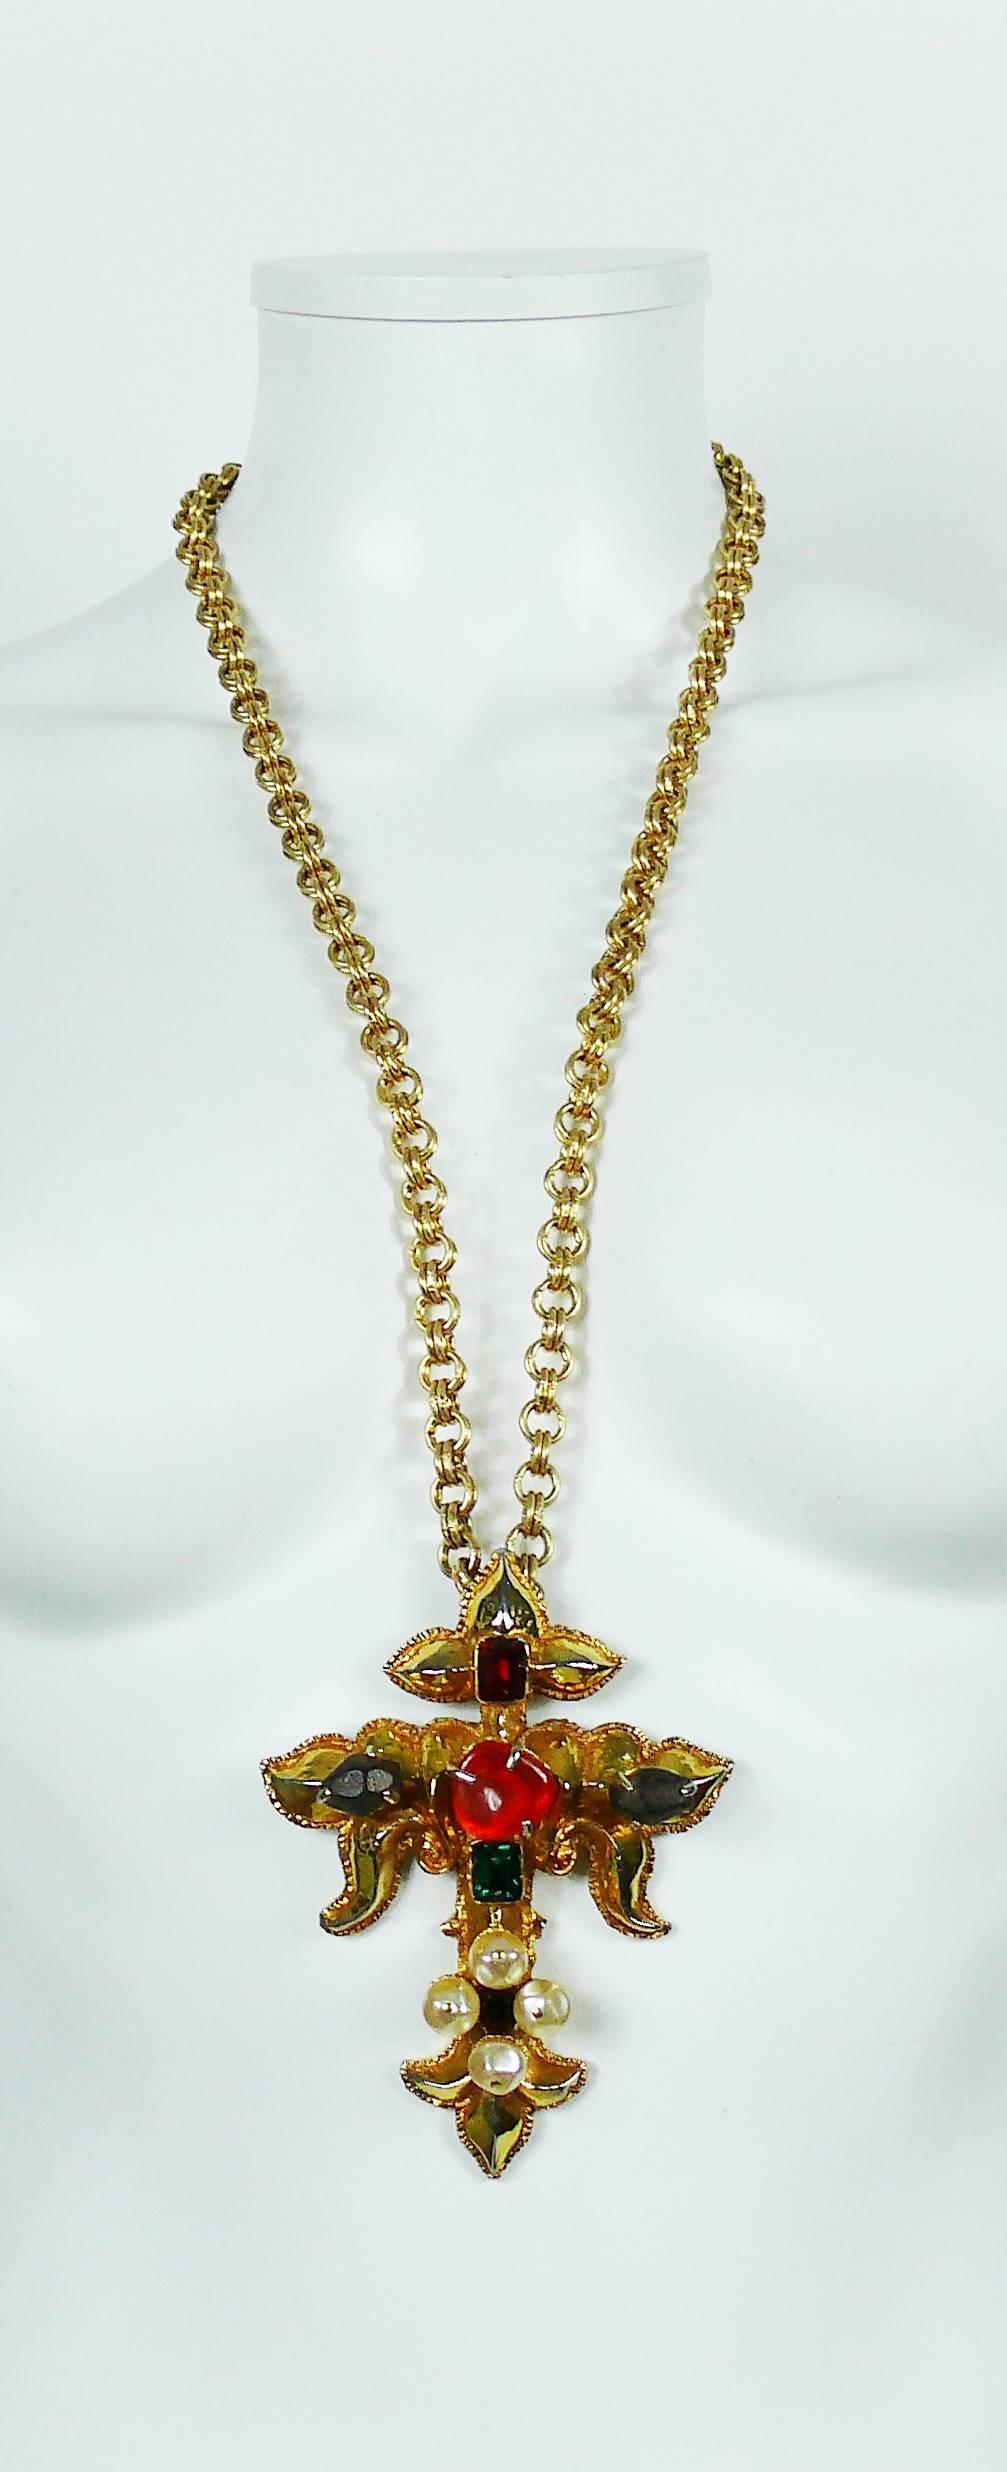 CHRISTIAN LACROIX vintage rare runway gold toned necklace featuring a chuncky chain and a gorgeous Baroque jewelled cross embellished with multicolored crystals, faux pearls, wood and resin cabochons.

Hook clasp closure.
Extension chain.

Marked